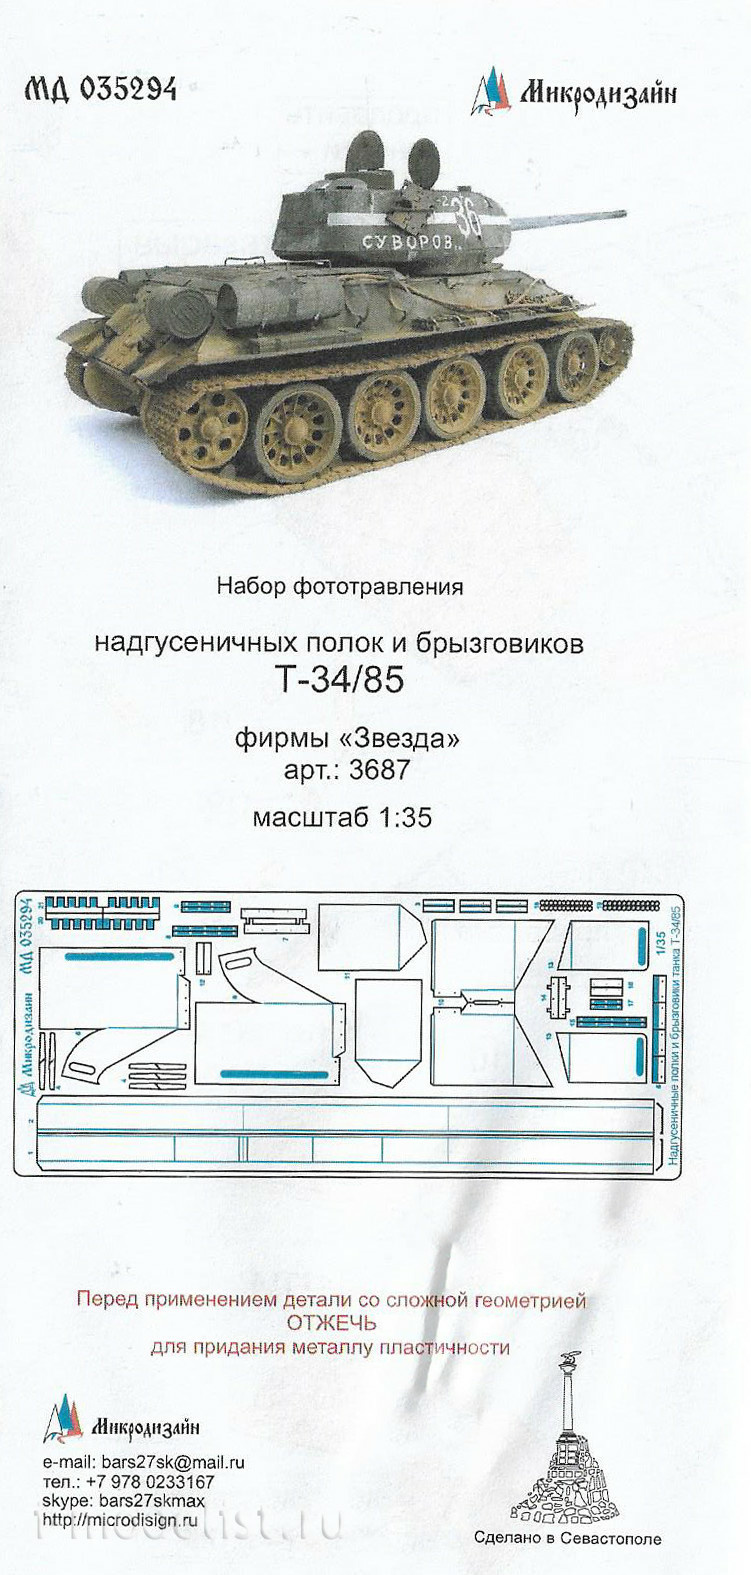 035294 Microdesign fenders 1/35 T-34/85 from the Zvezda